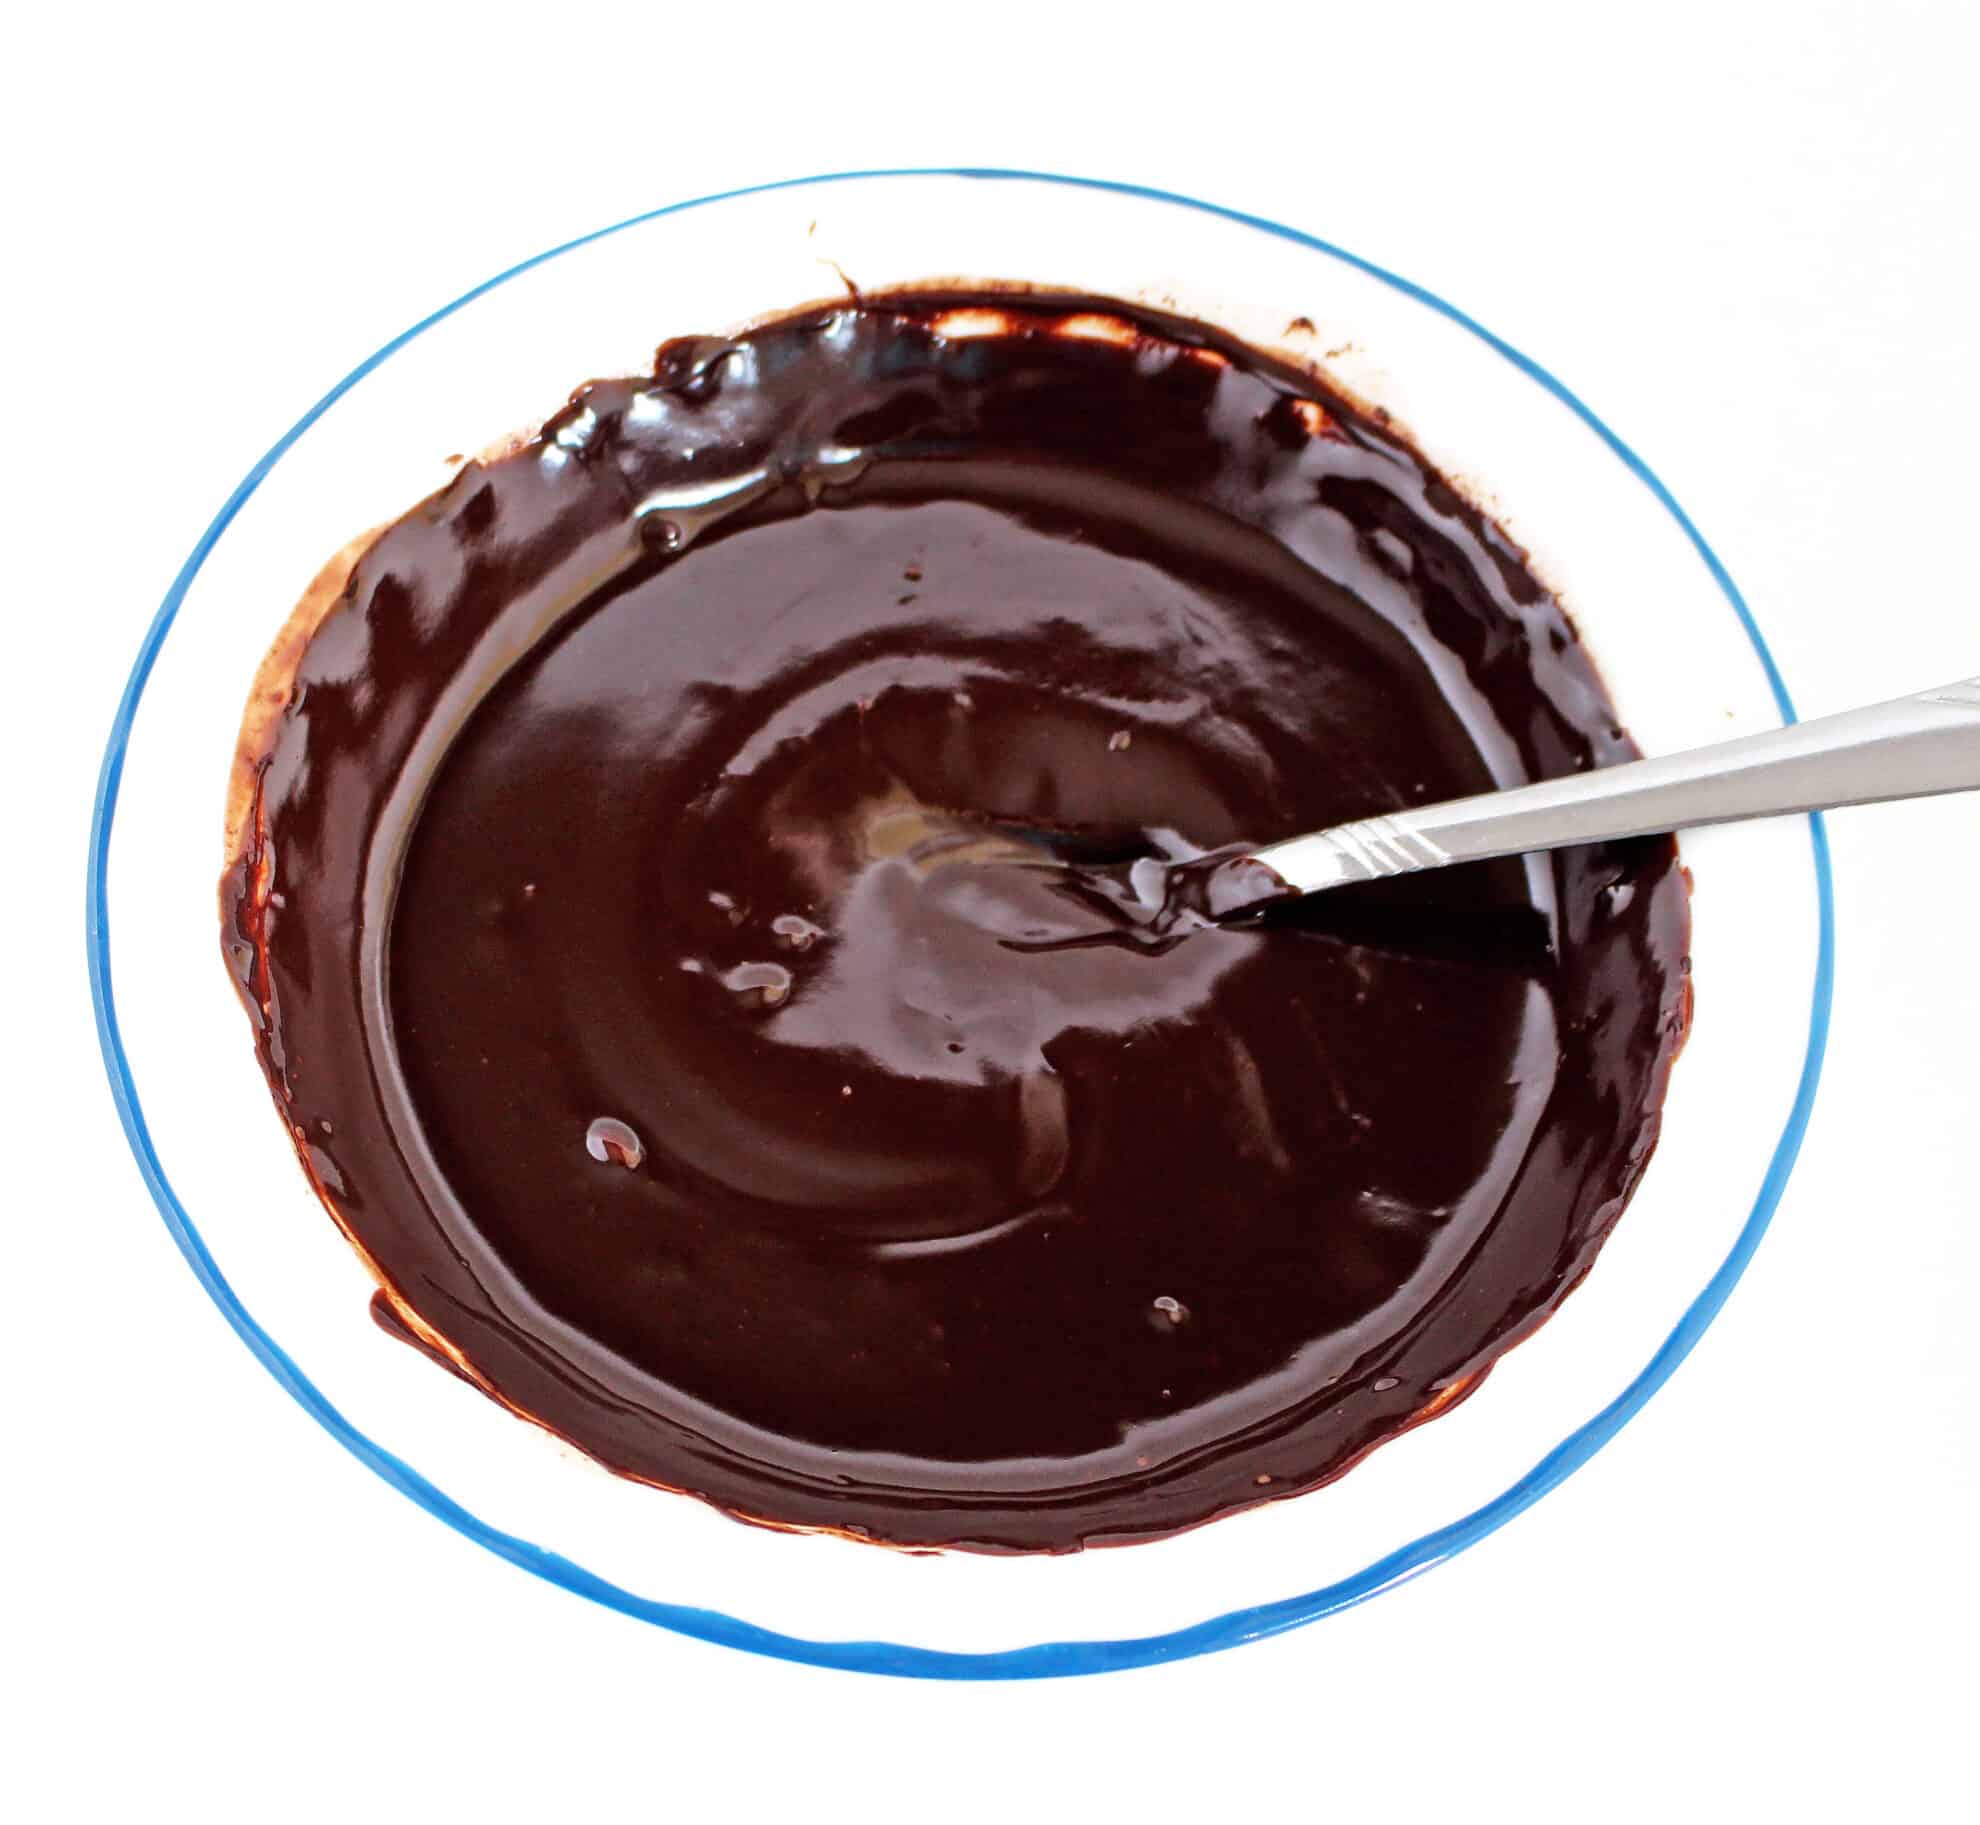 You can also use the same ingredients but microwave it instead by adding the chocolate bar and milk to a microwave-safe bowl and microwaving it in 30-second intervals till the chocolate melts. Stir each time till it turns into a beautiful ganache.